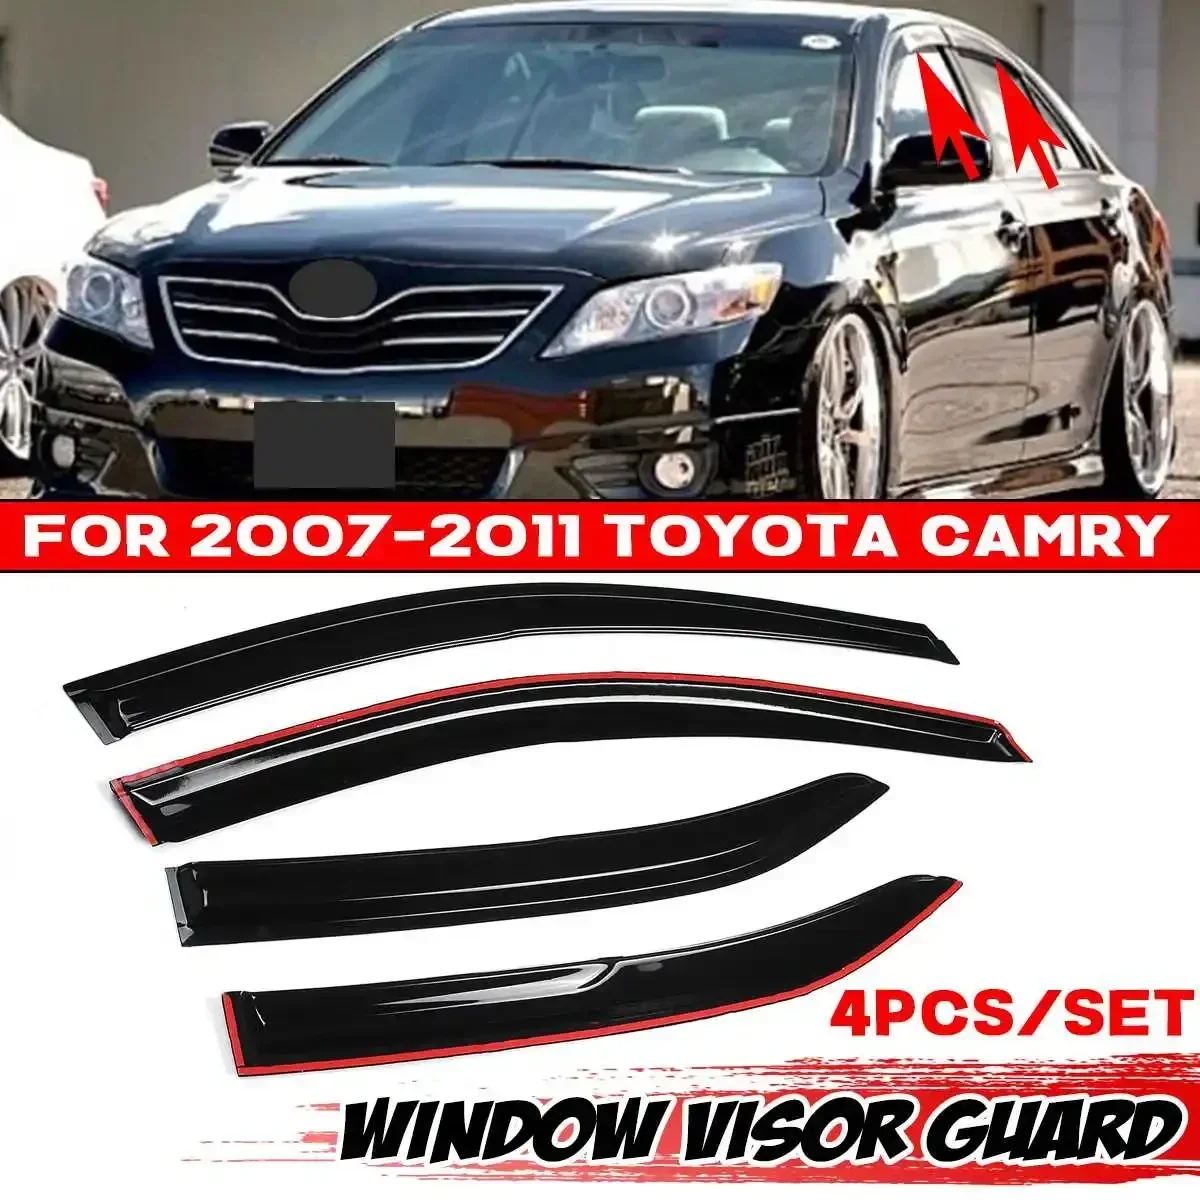 

High Quality Car Door Window Visor Guard Vent Window Visor Vent Sun Rain Guard For Toyota For Camry 2007-2020 Awnings Shelters